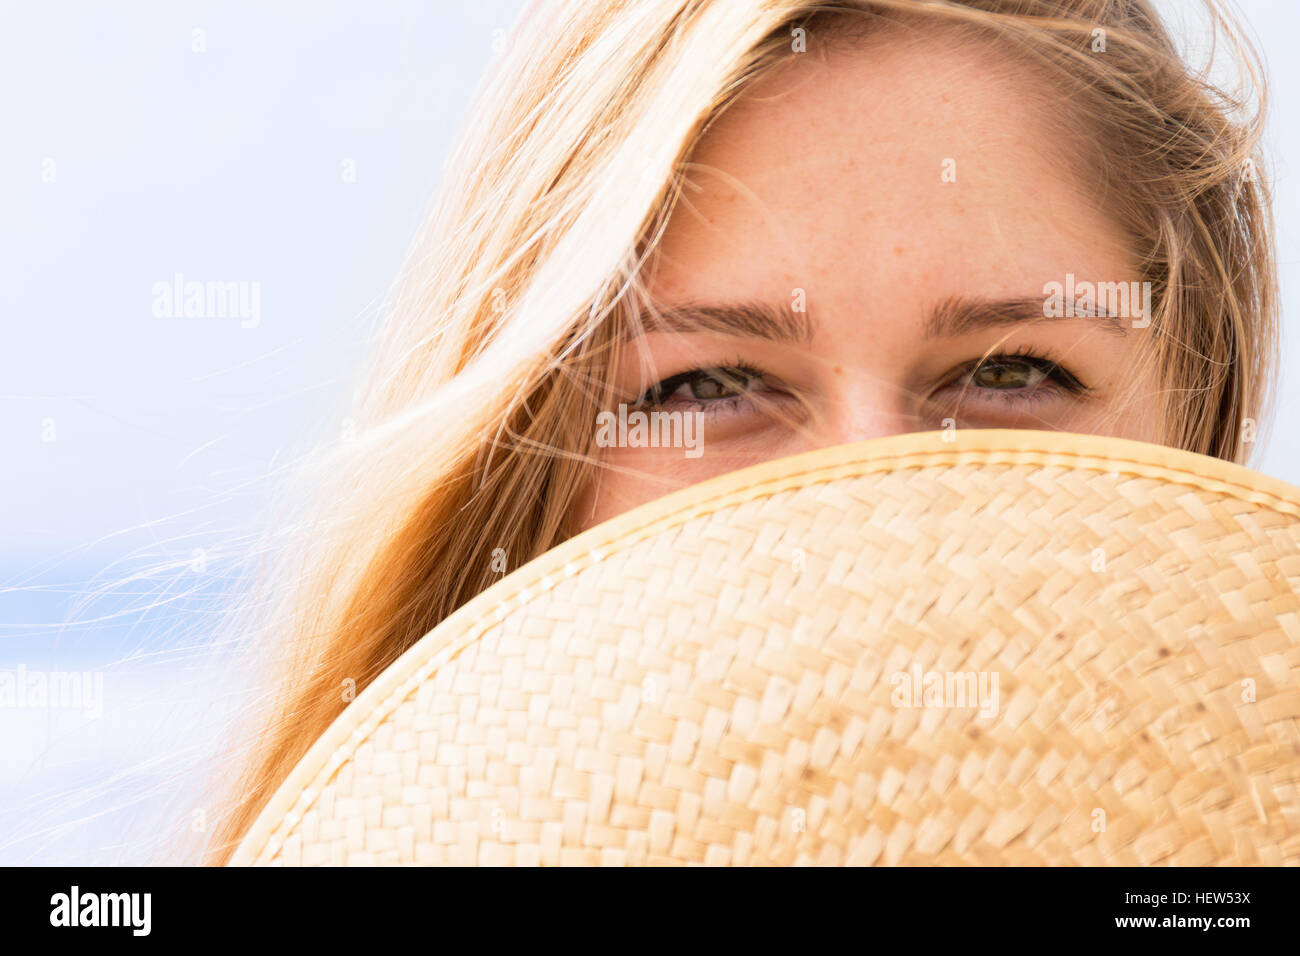 Young woman covering face with hat Banque D'Images